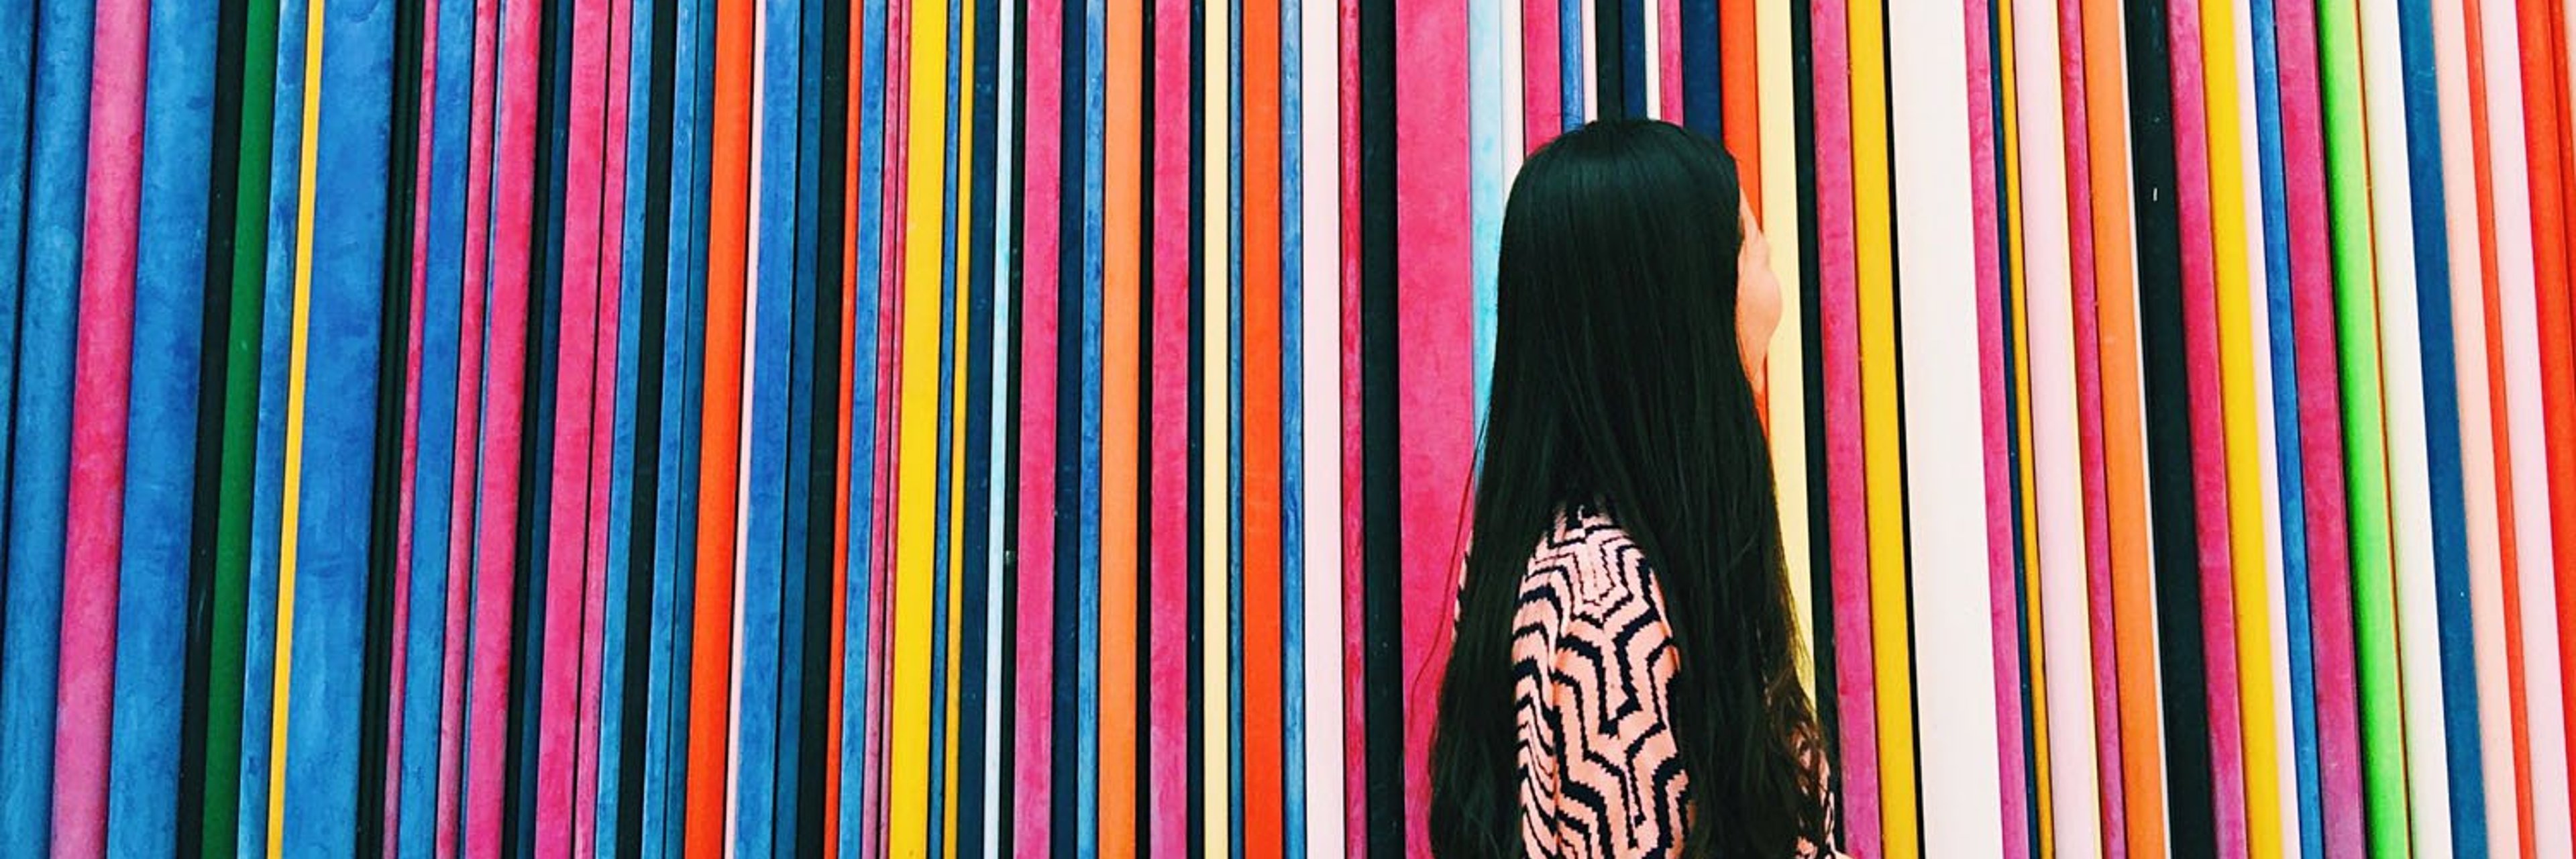 A woman with long black hair standing in front of a colorful fabric wall displaying multicolored lines.